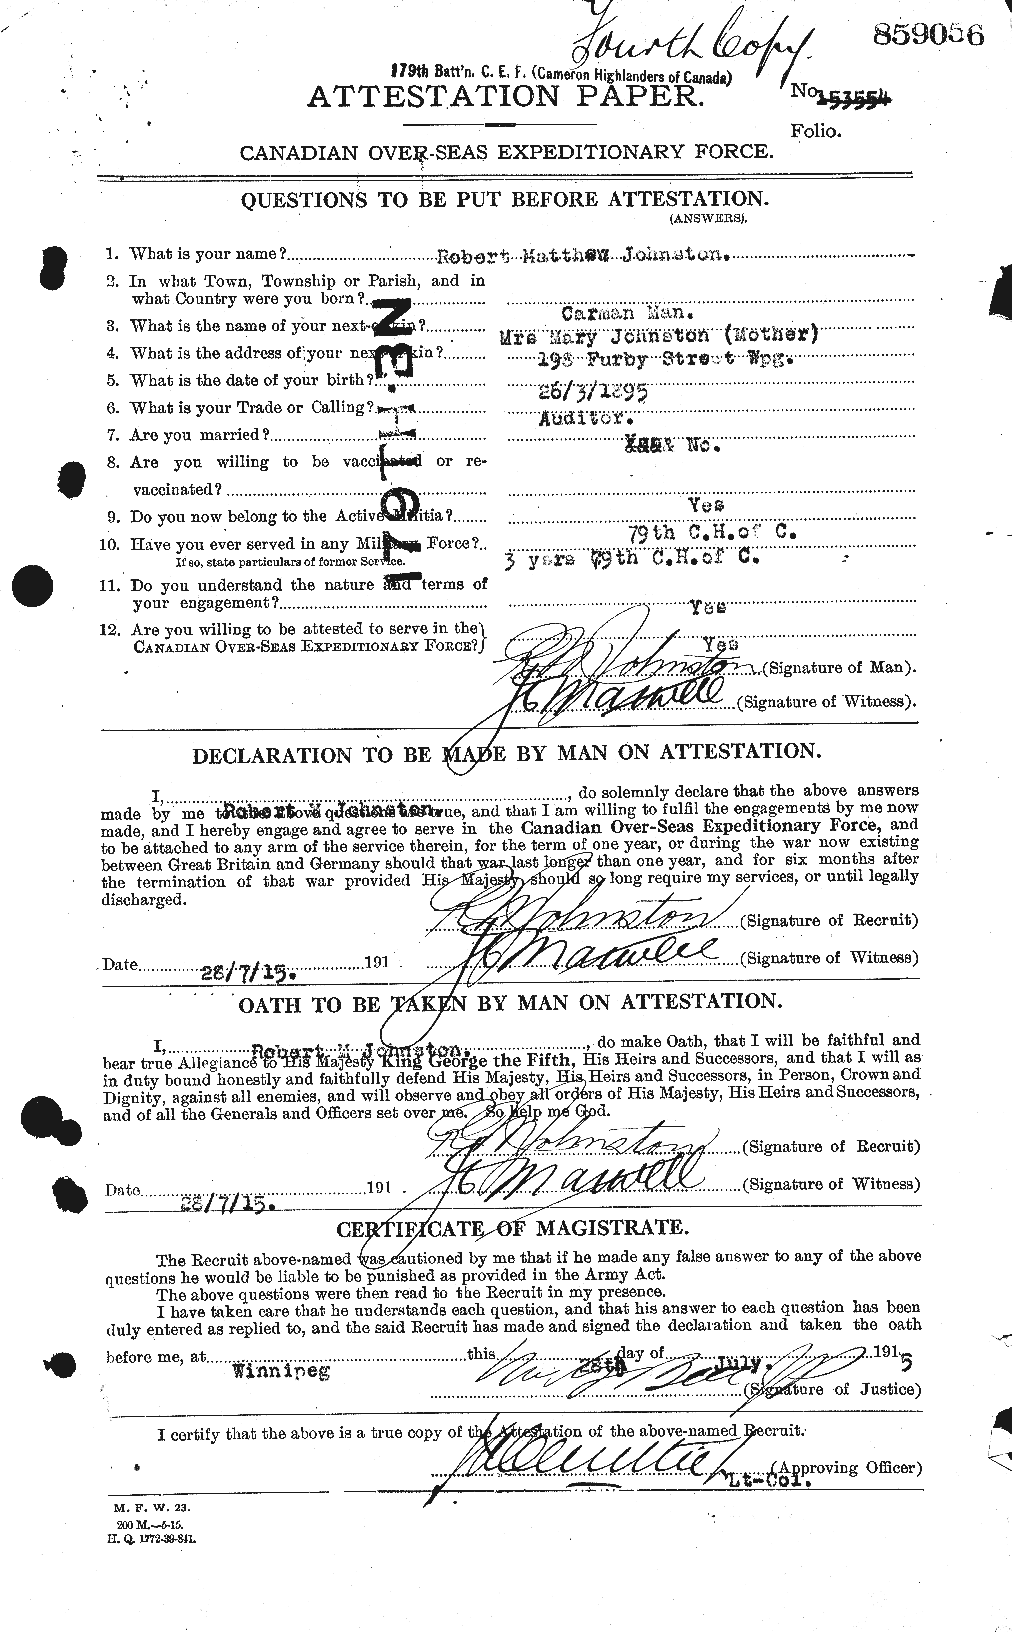 Personnel Records of the First World War - CEF 423067a